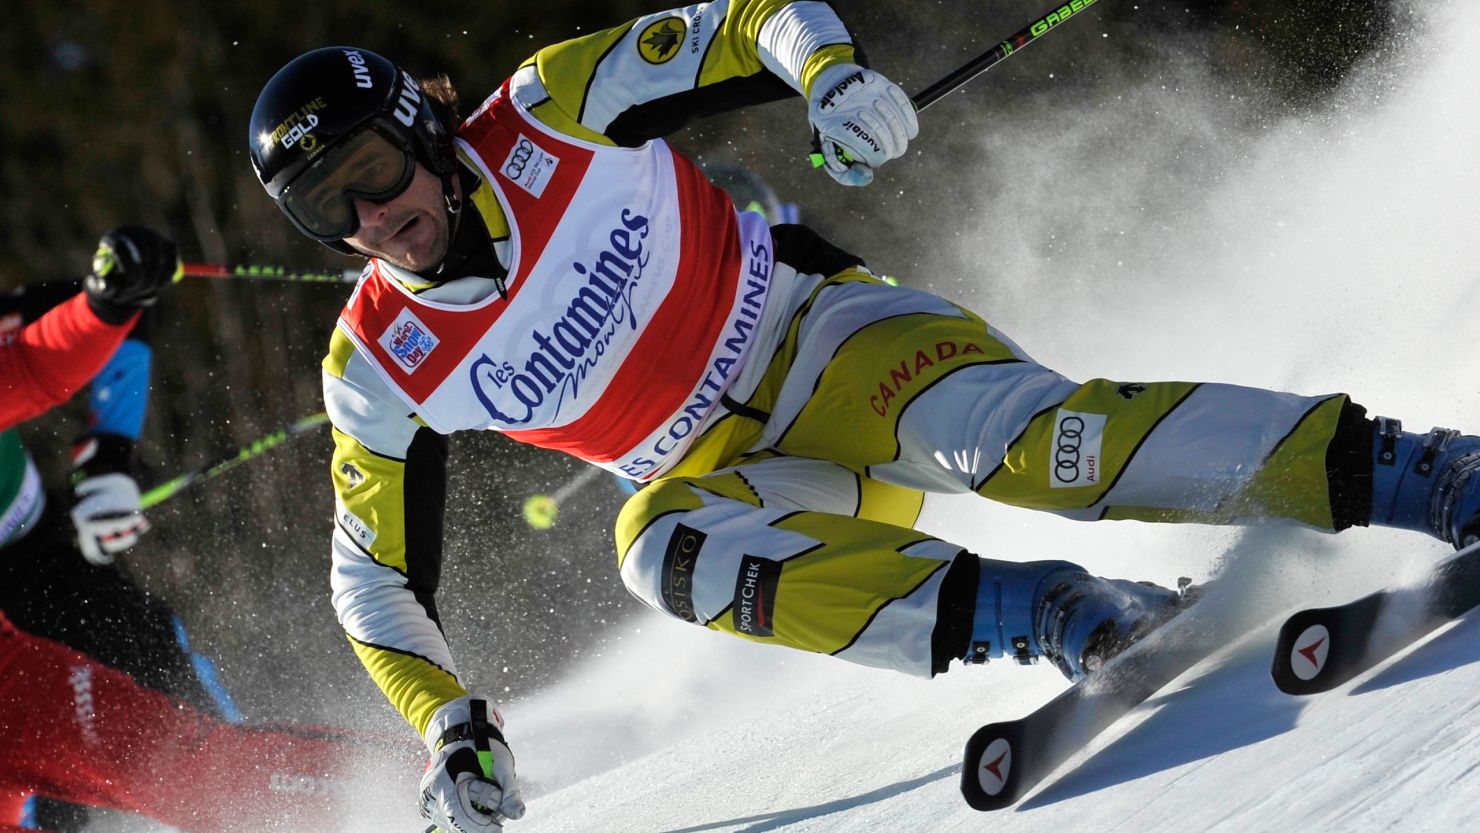 Canada's Nik Zoricic competing in a World Cup event earlier this year. He has died after a crash in a race in Switzerland.